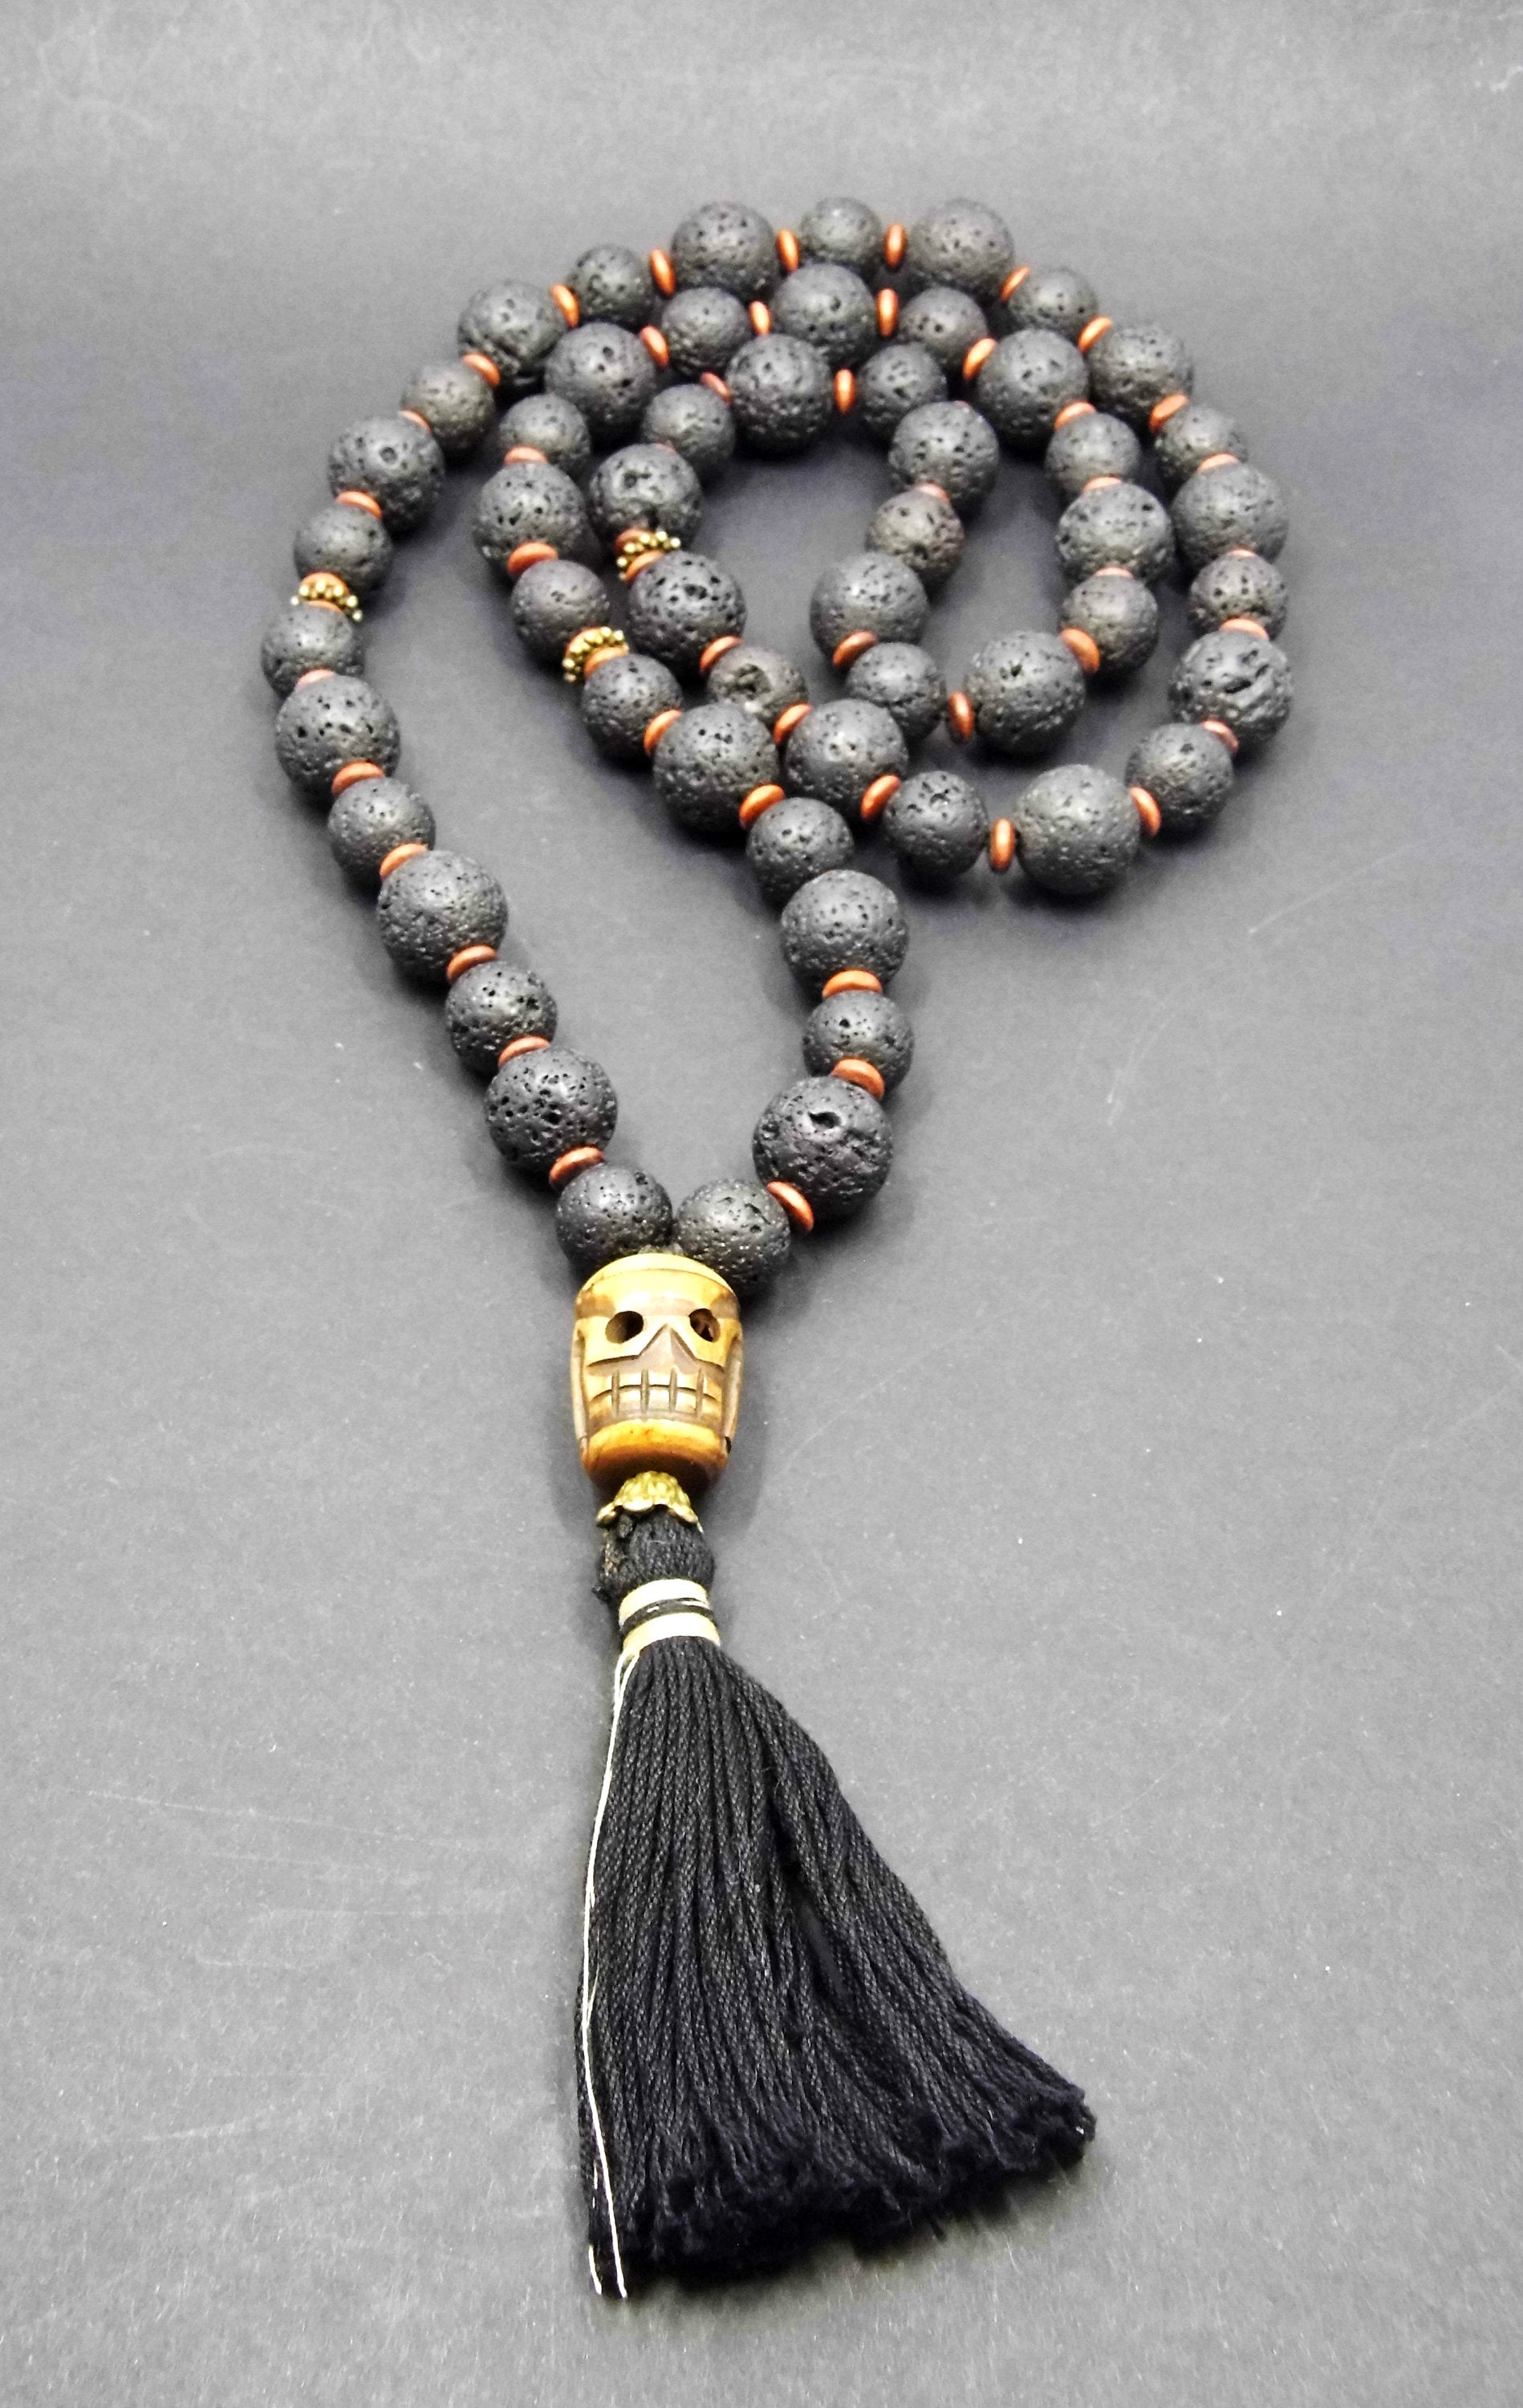 54 Natural Beads with Tassels